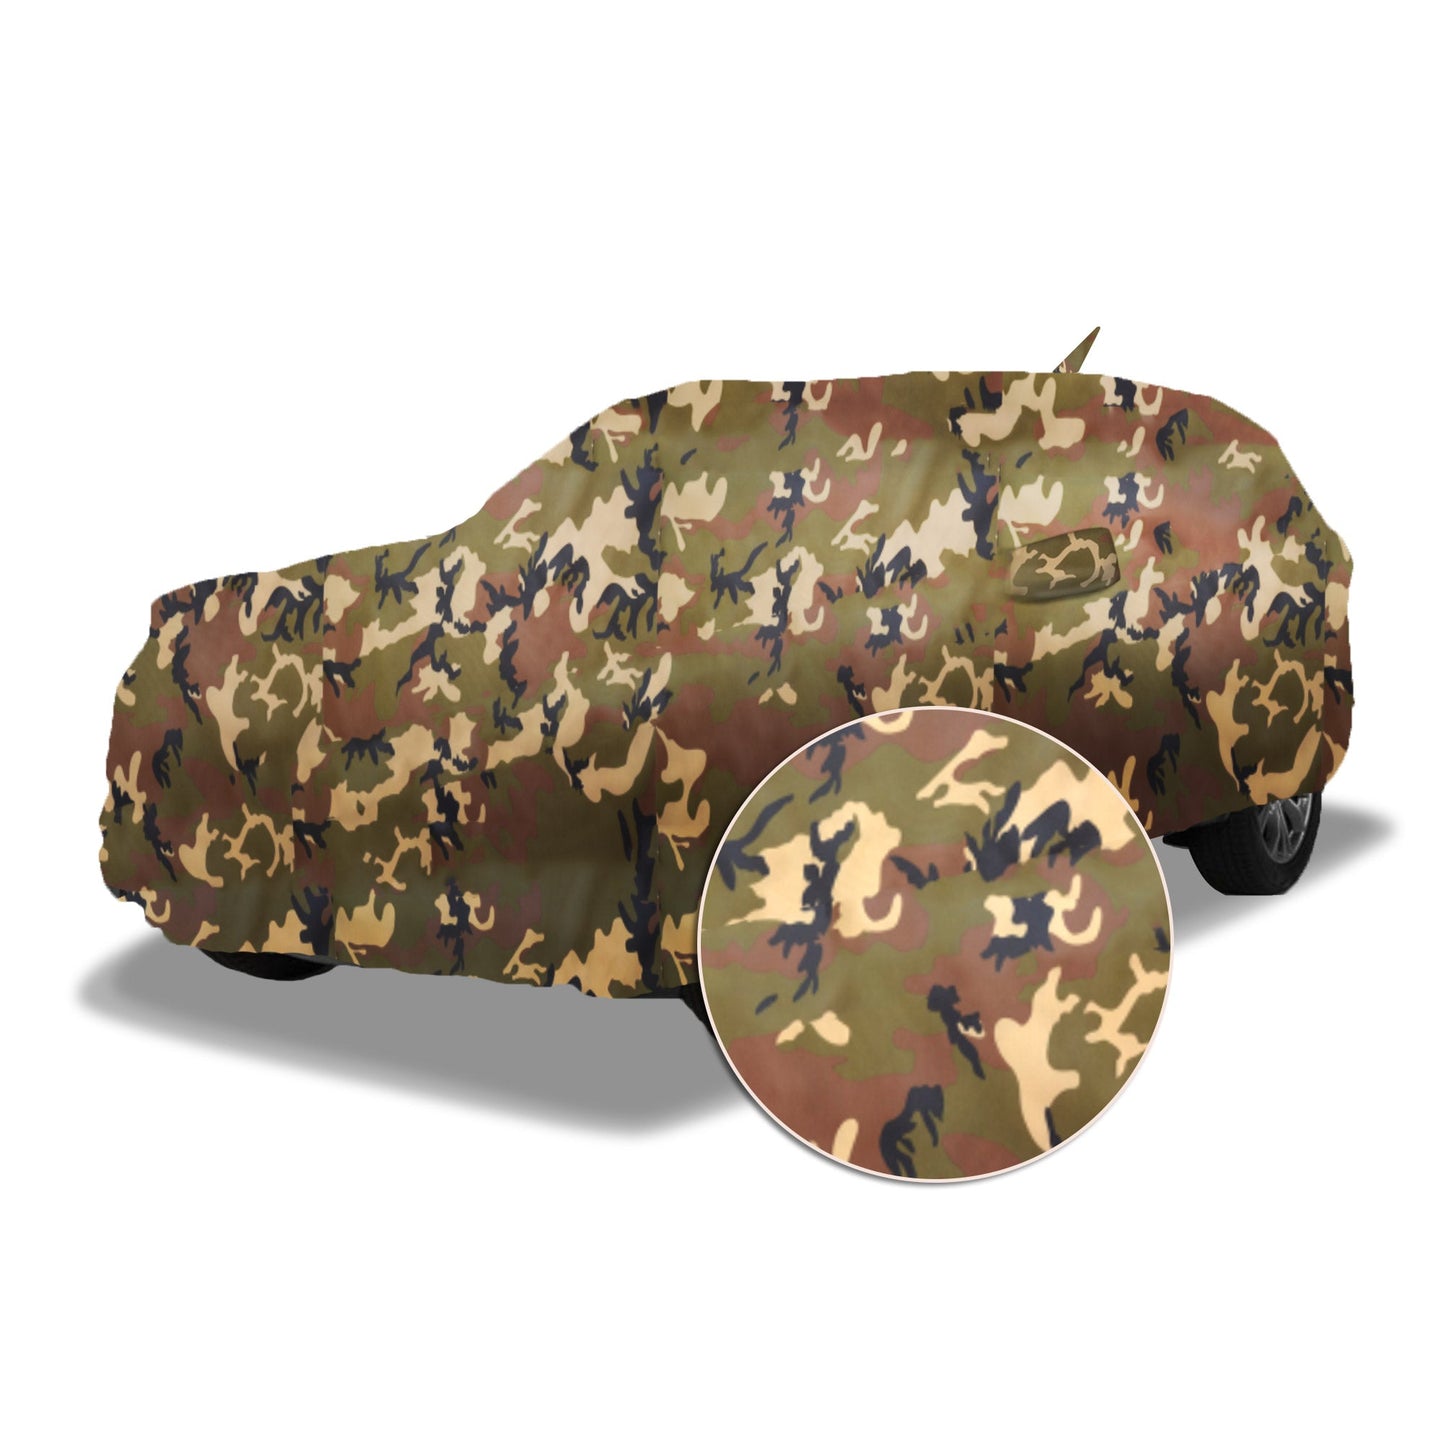 Ascot Skoda Yeti 2009-2017 Model Car Body Cover Extra Strong & Dust Proof Jungle Military Car Cover with UV Proof & Water-Resistant Coating